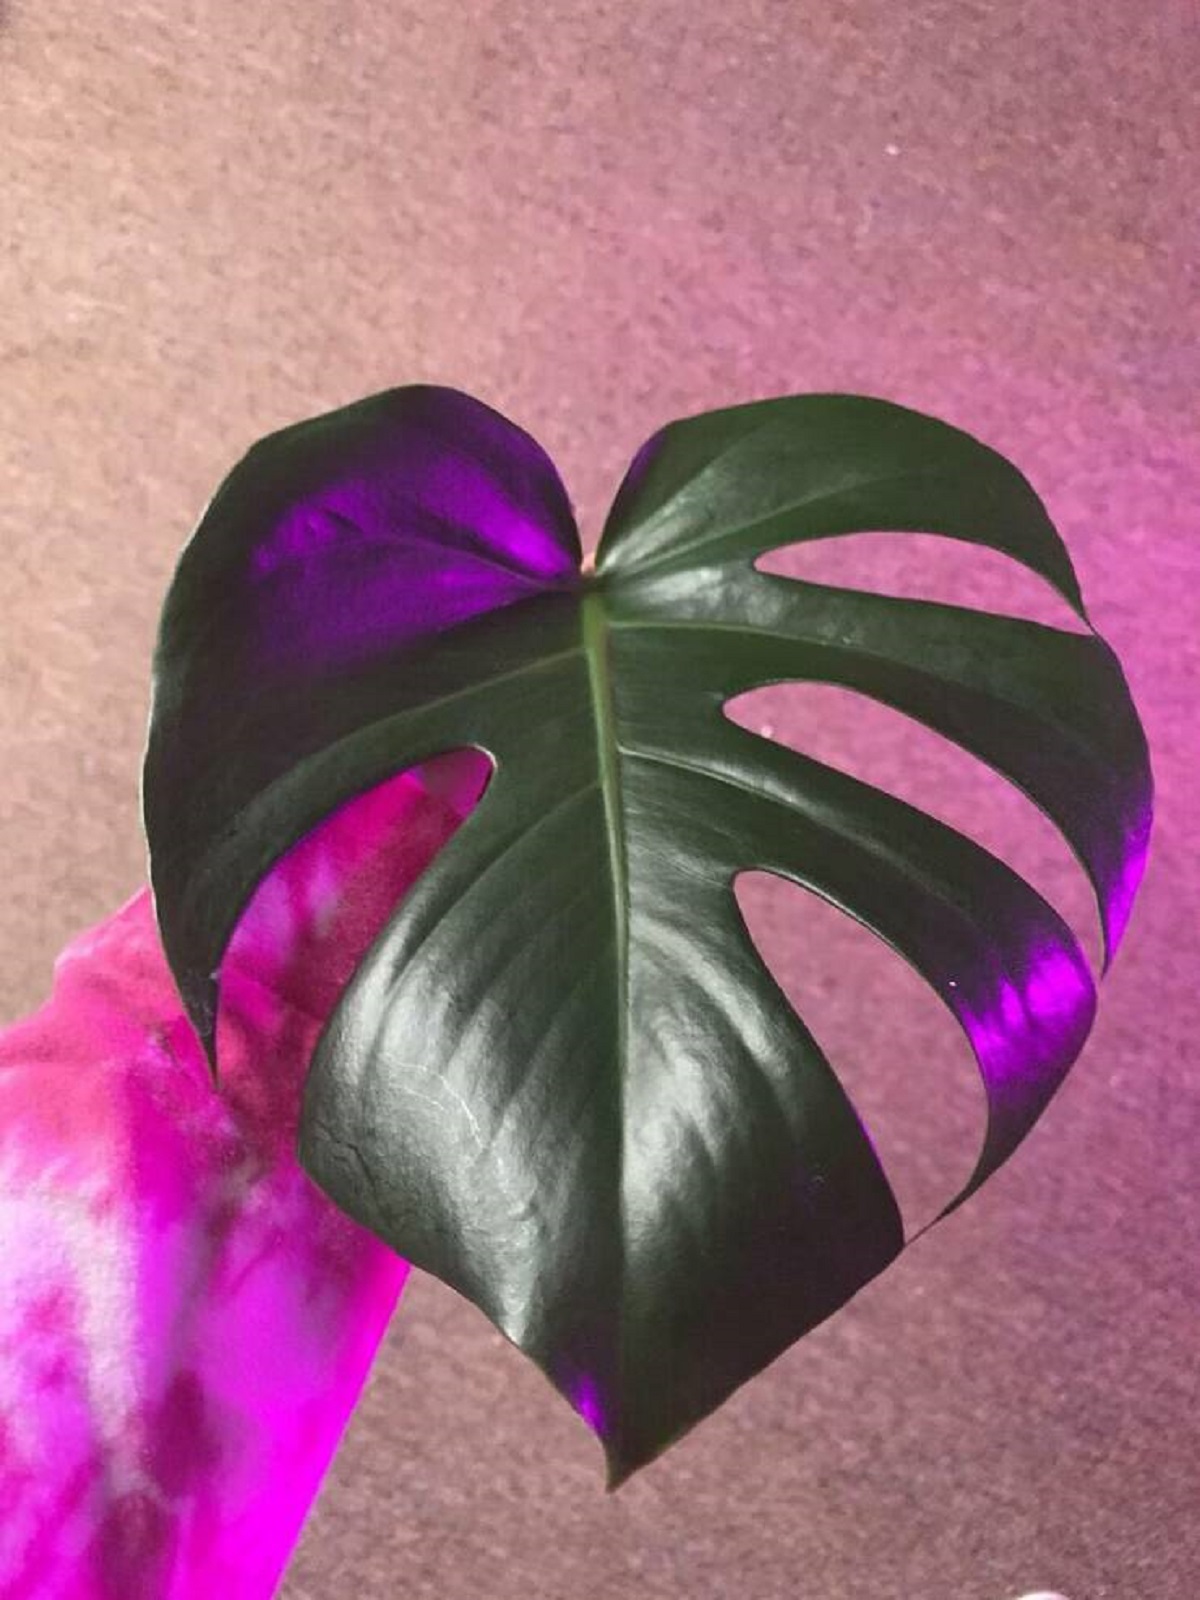 "My cat chewed off the first leaf my monstera plant created with fenestrations on both sides."